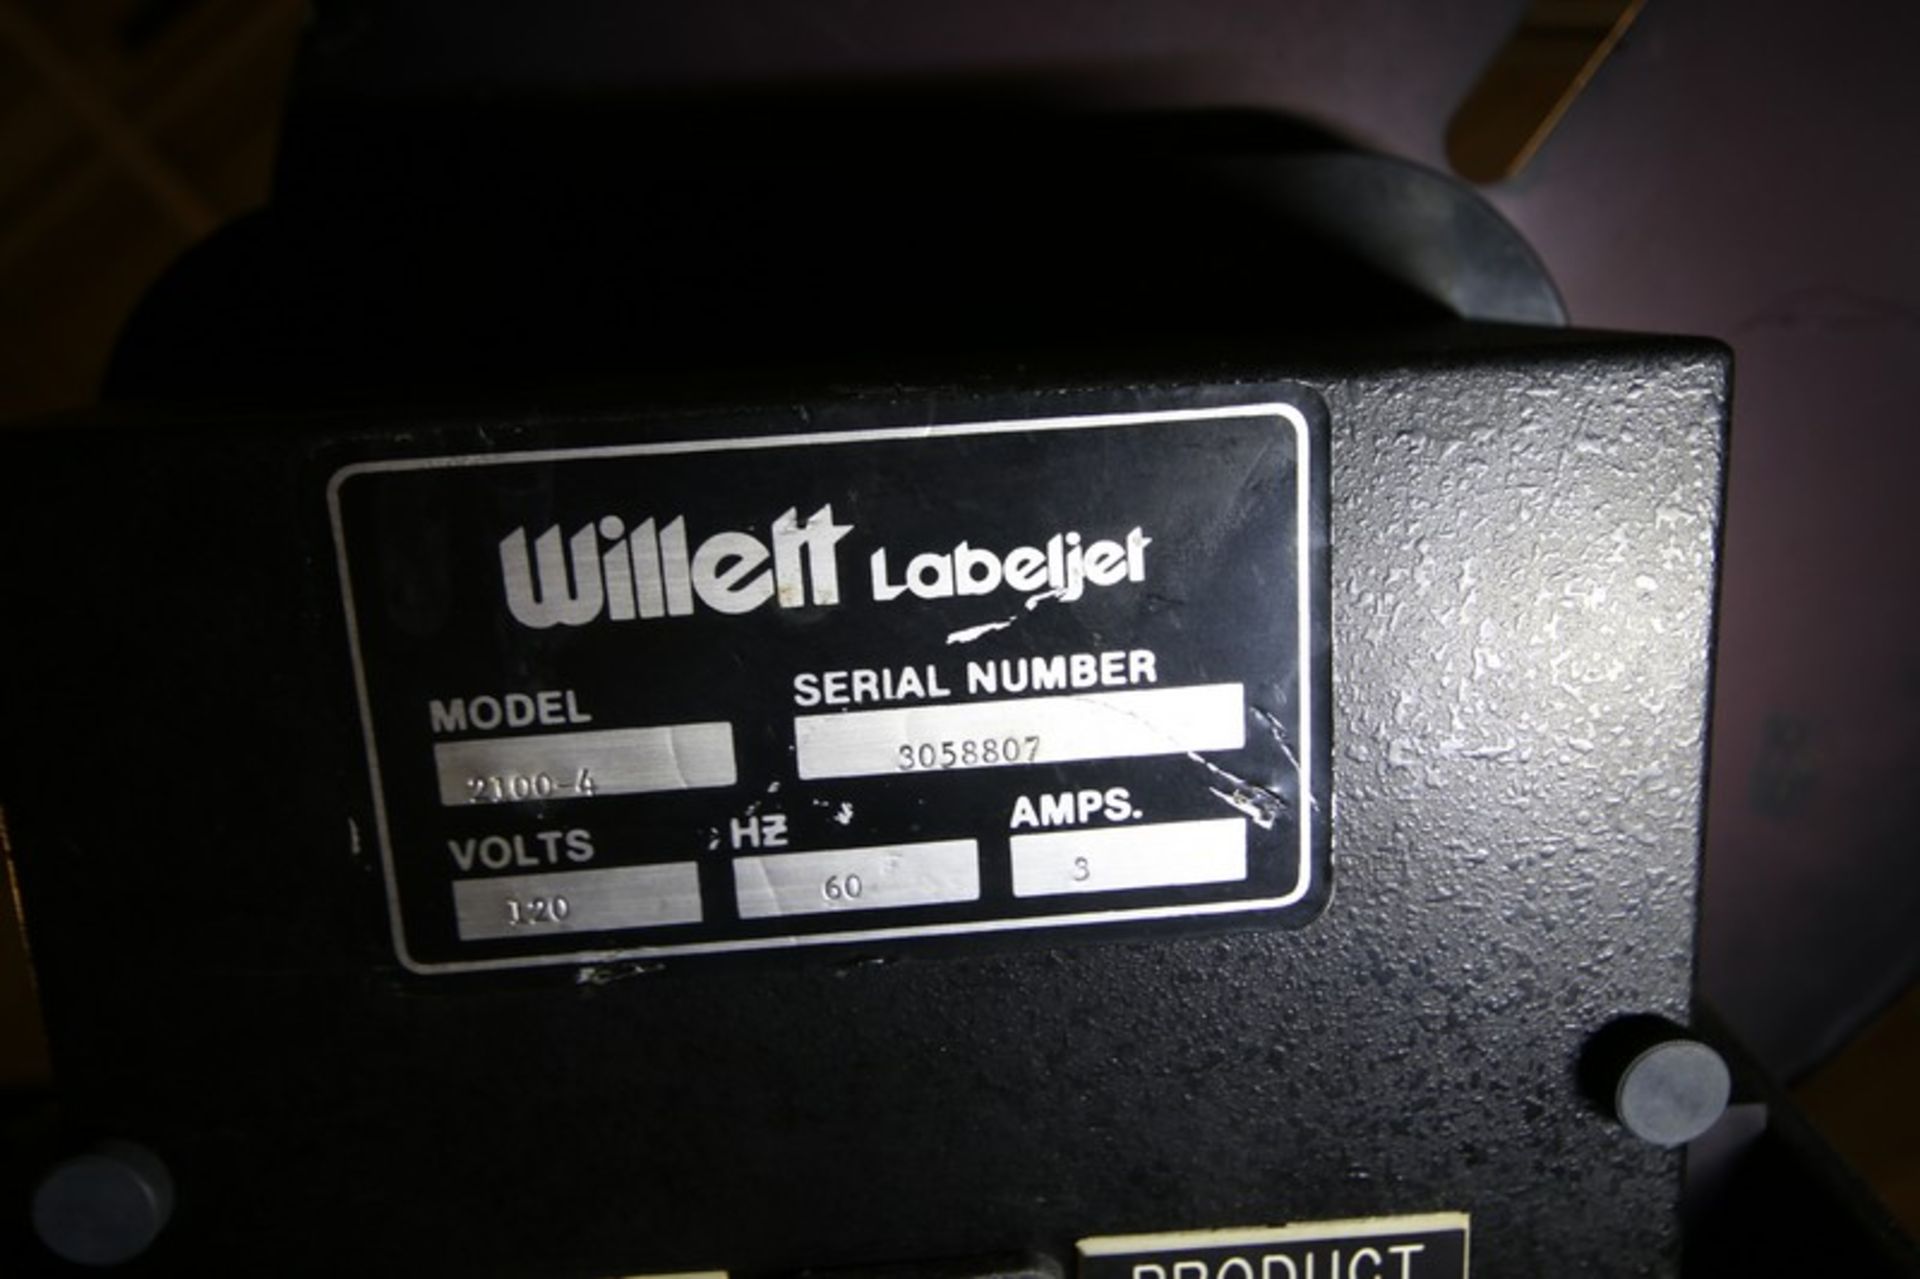 Willet Labeljet Portable Labeler with (2) Heads, Model 2100-4, SN 3048807 & 3058807, with 10' L x - Image 7 of 10